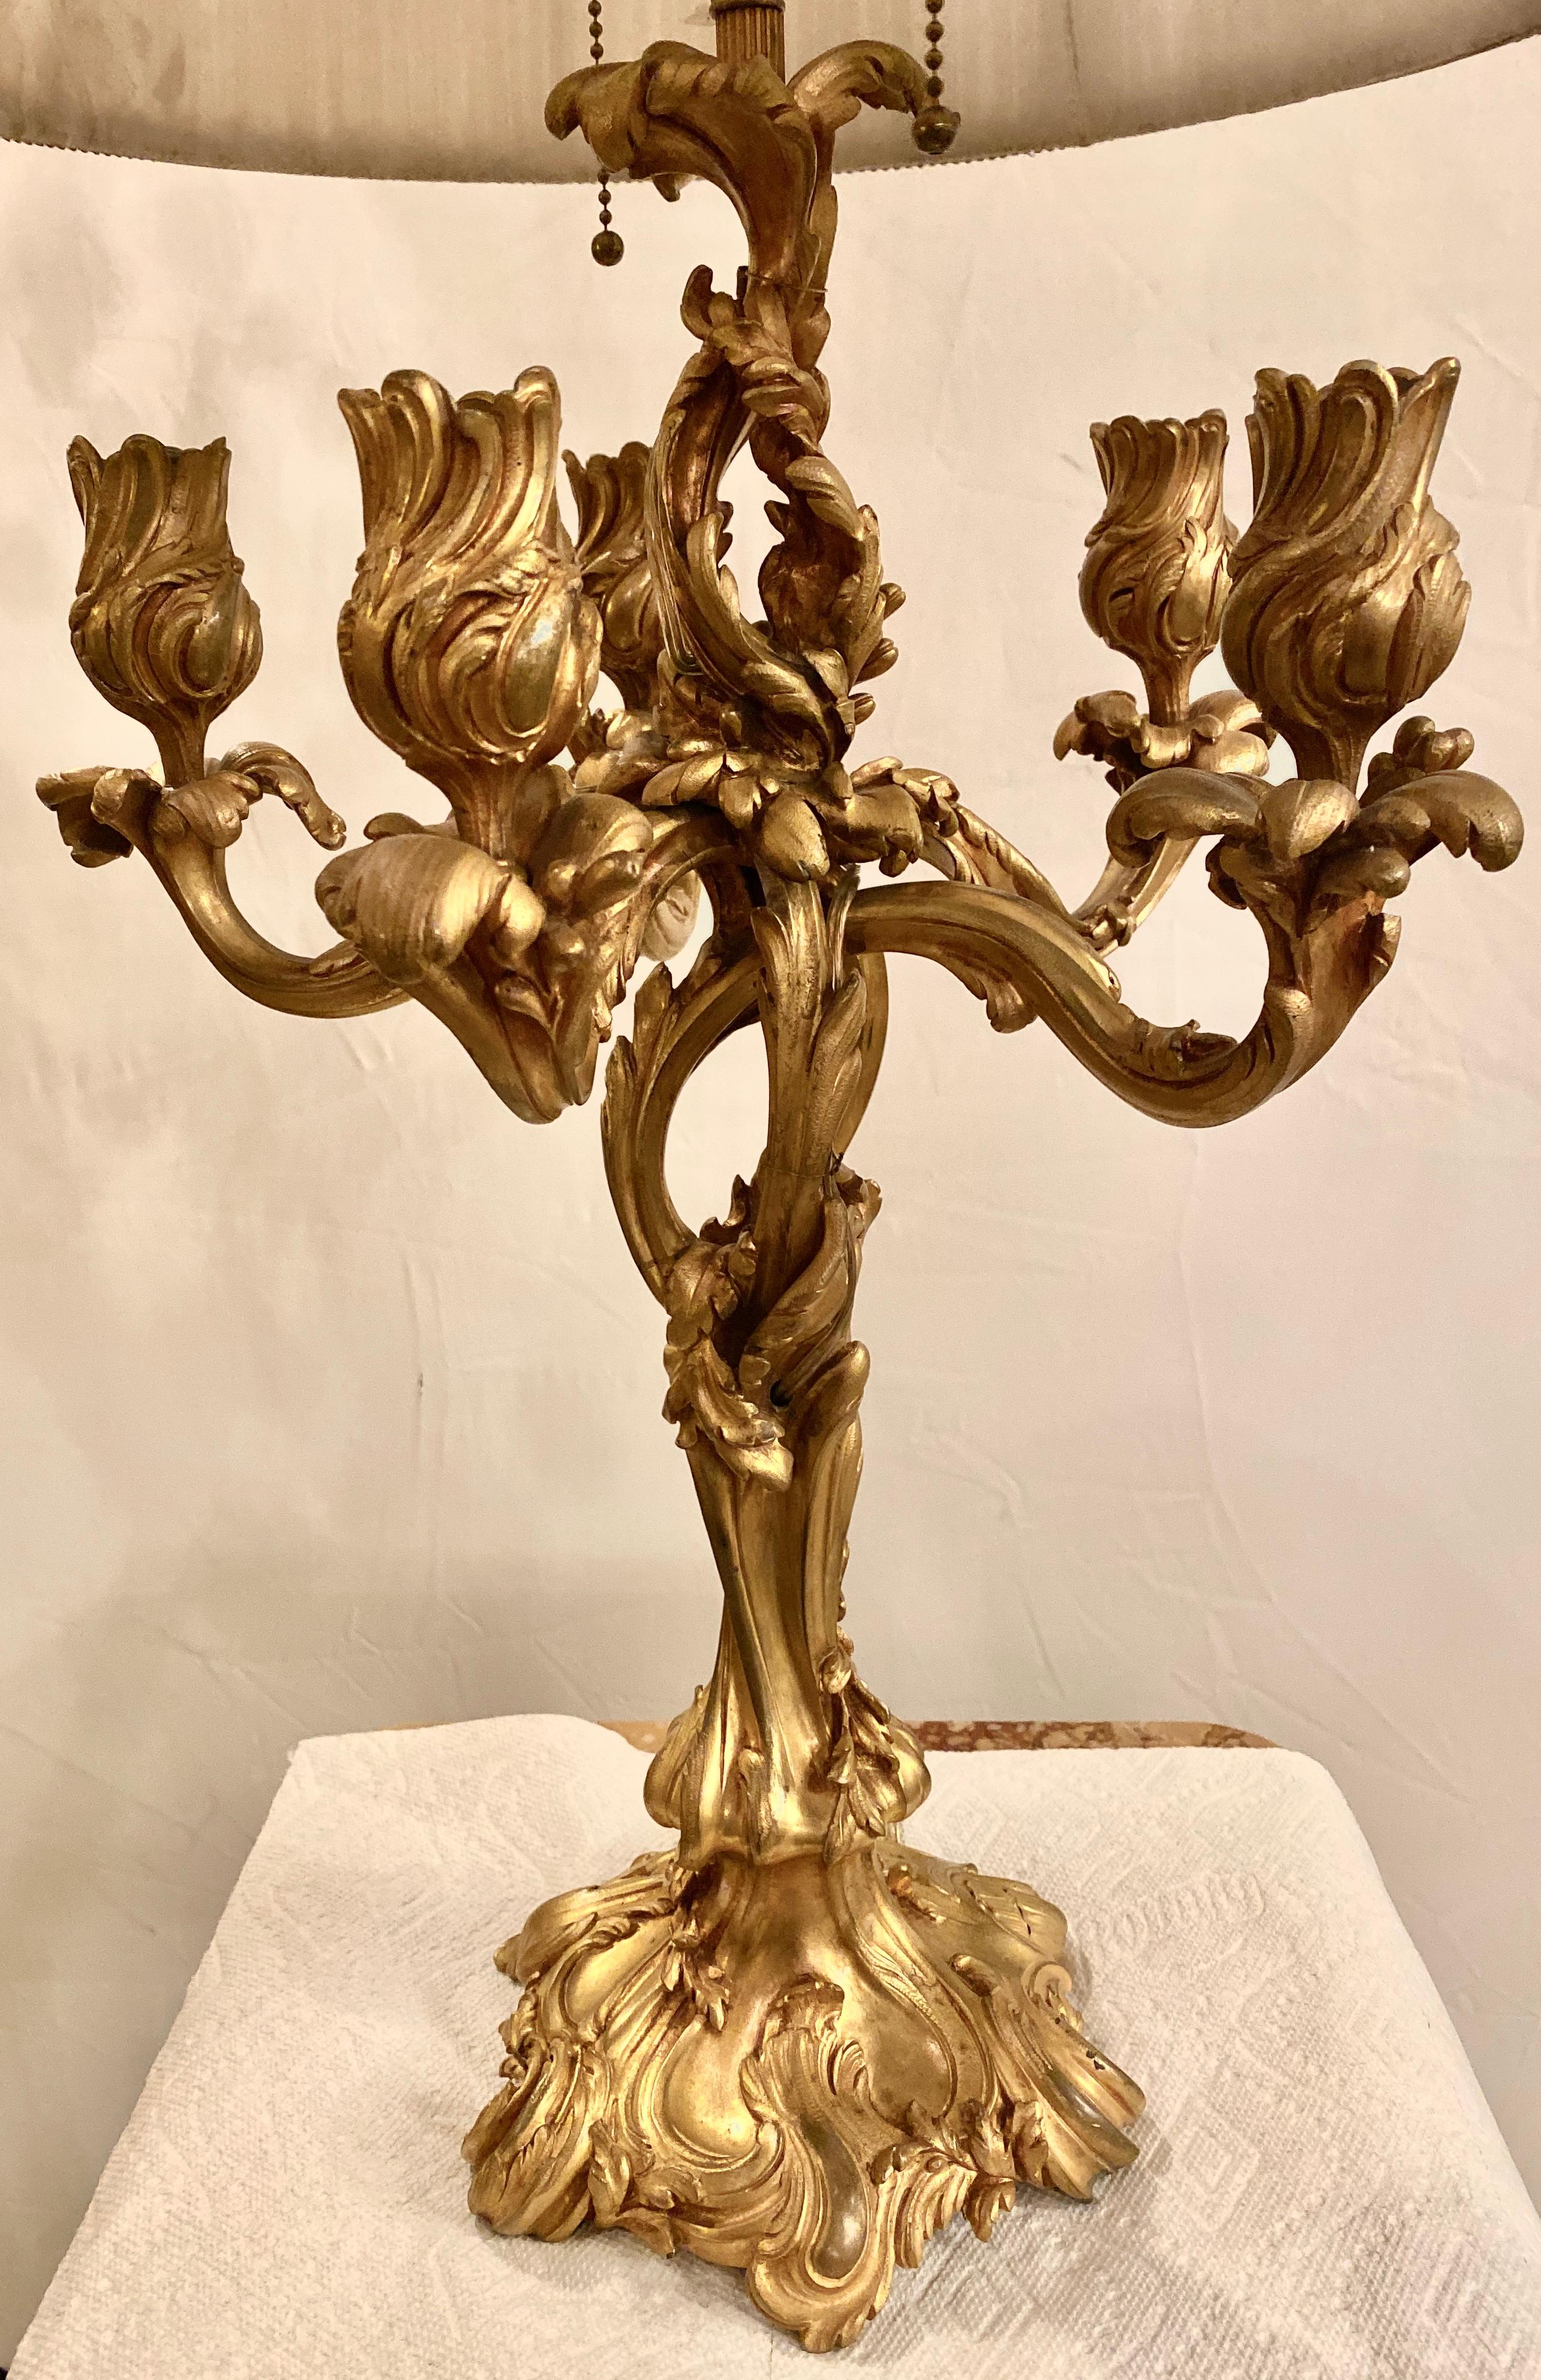 French Louis XV style doré bronze candelabra electrified having foundry Marks Paris Jullet+Cie. The twisted and finely chased candelabra has five lights with the sixth light converted into a lamp socket taking two light bulbs. The whole having a